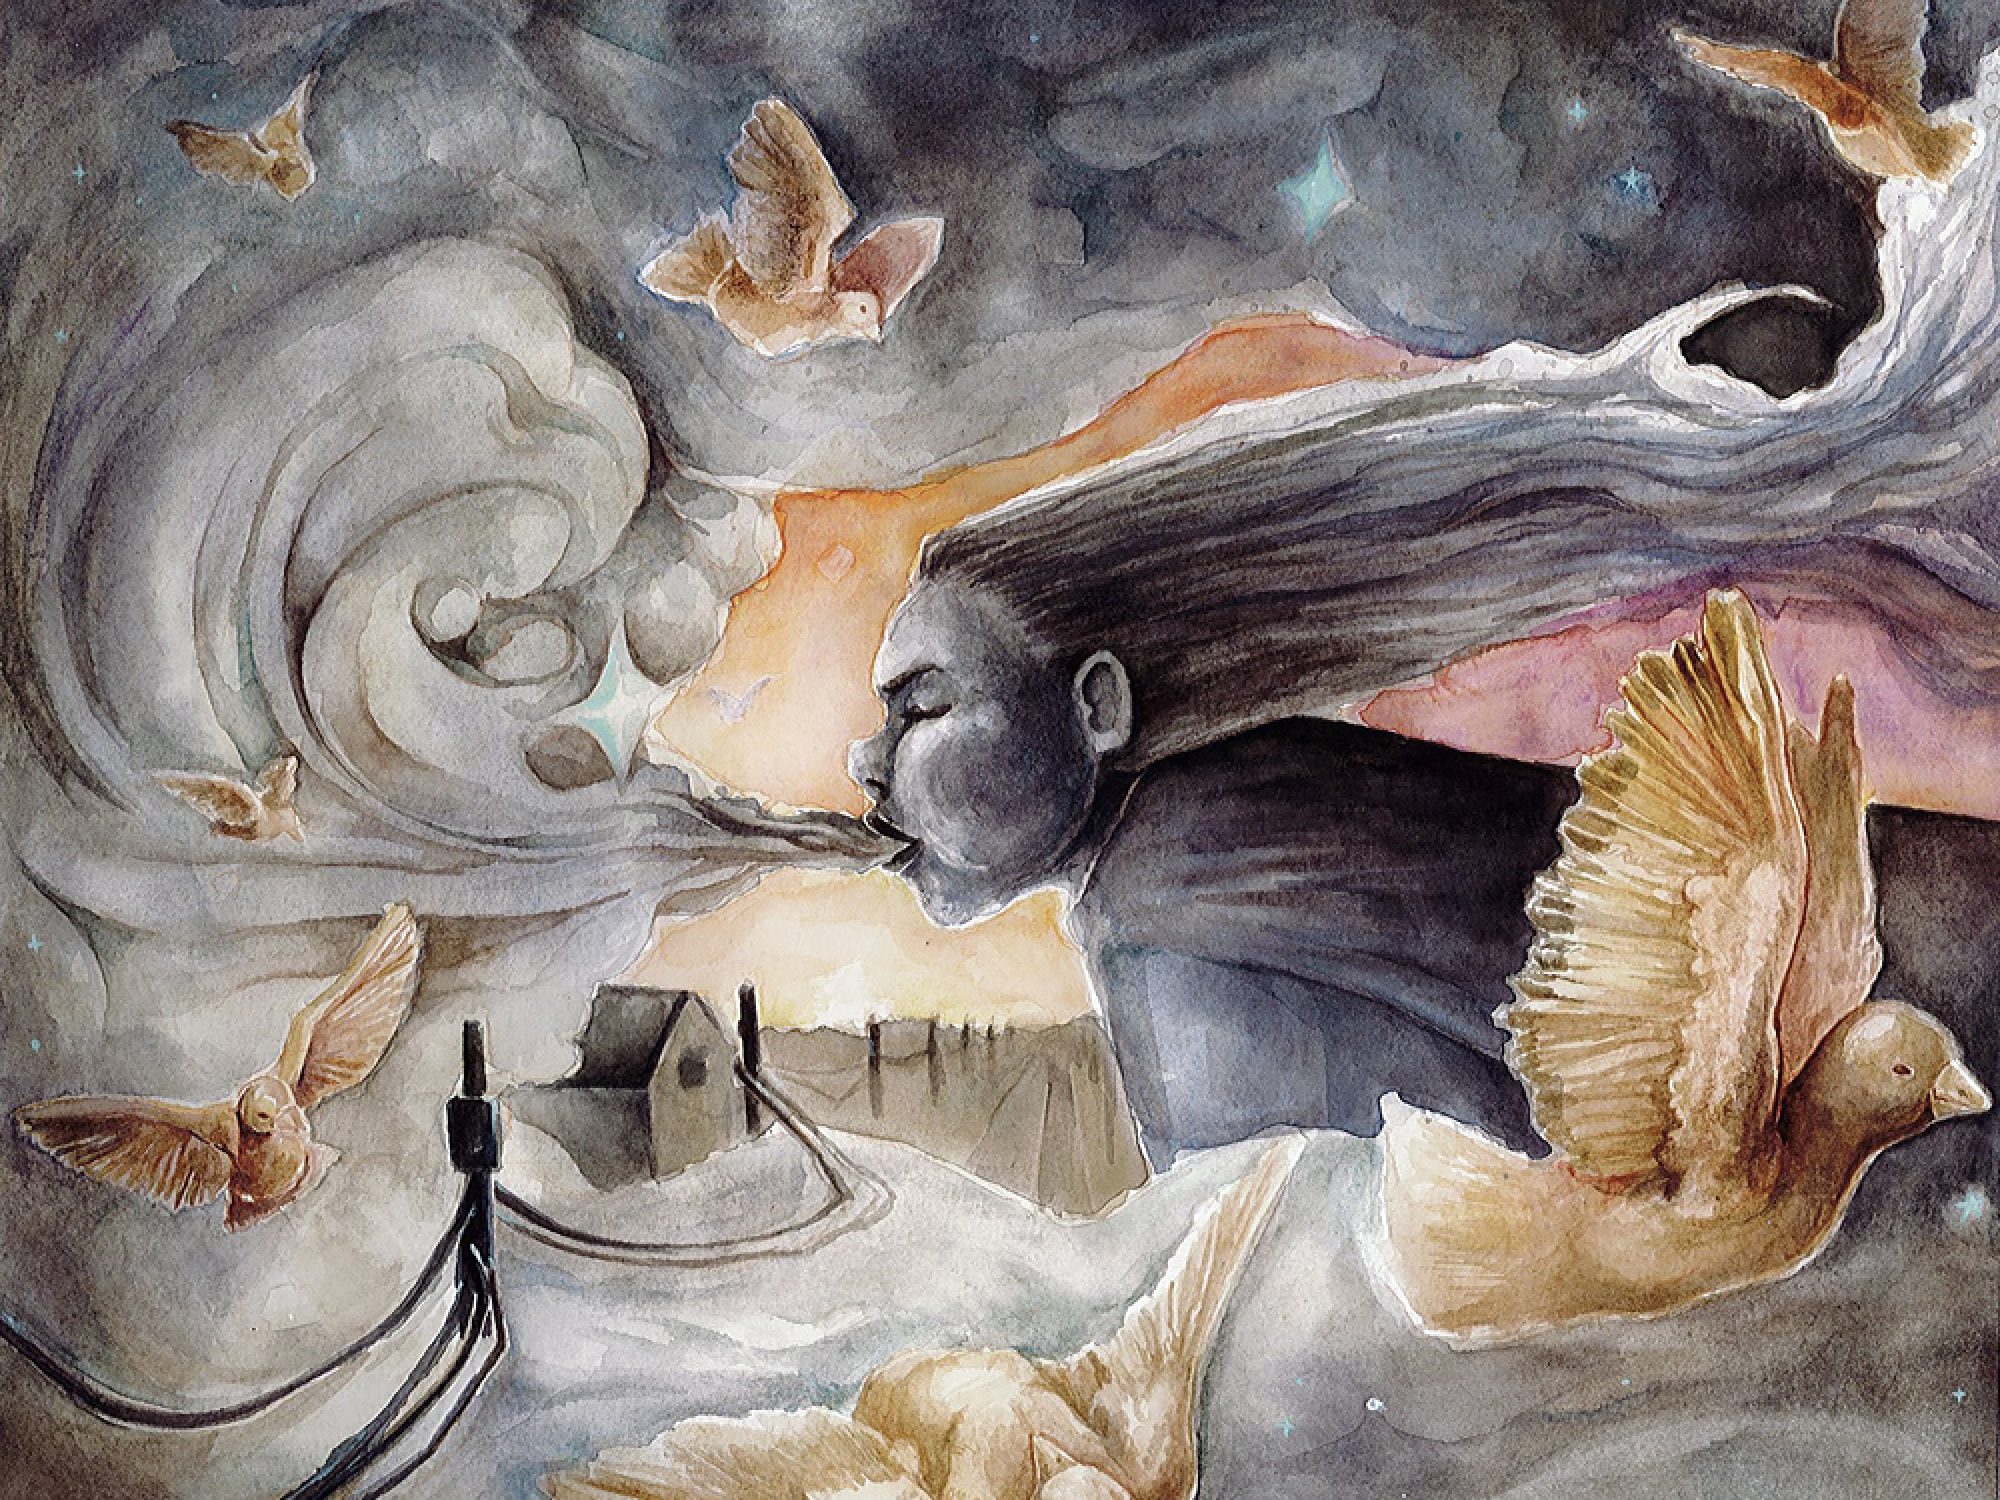 Painting of a figure breathing out clouds with birds around the piece